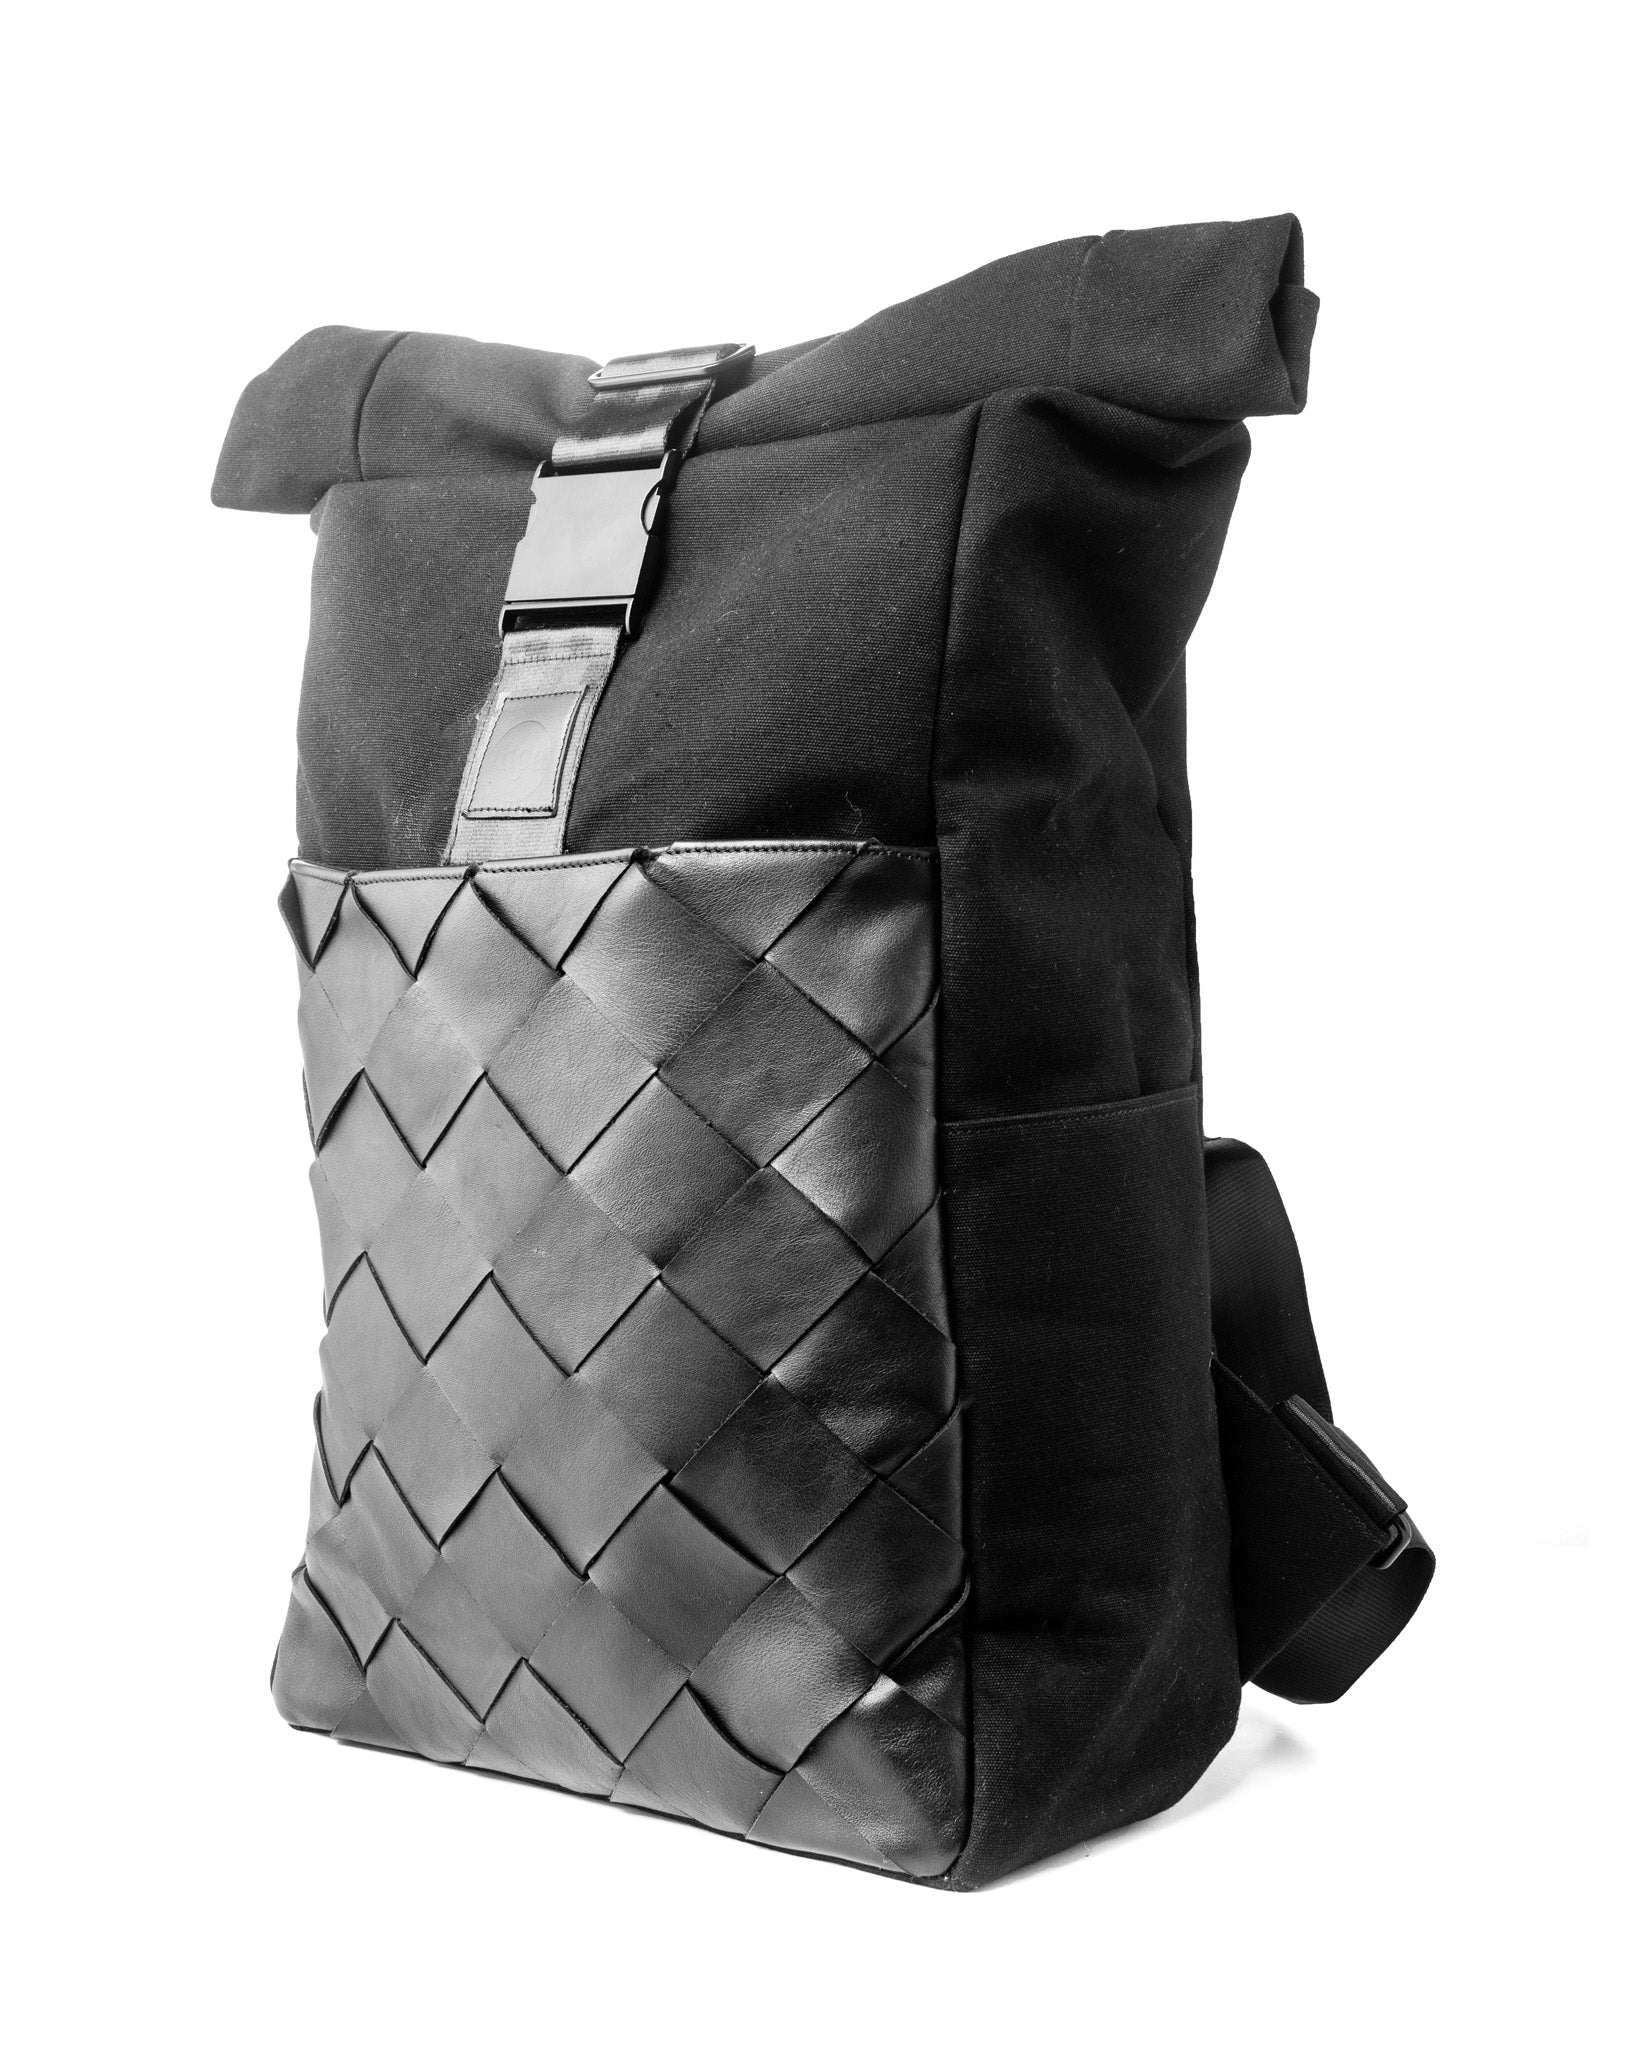 SUMMIT Roll Top Backpack-Black - theabags